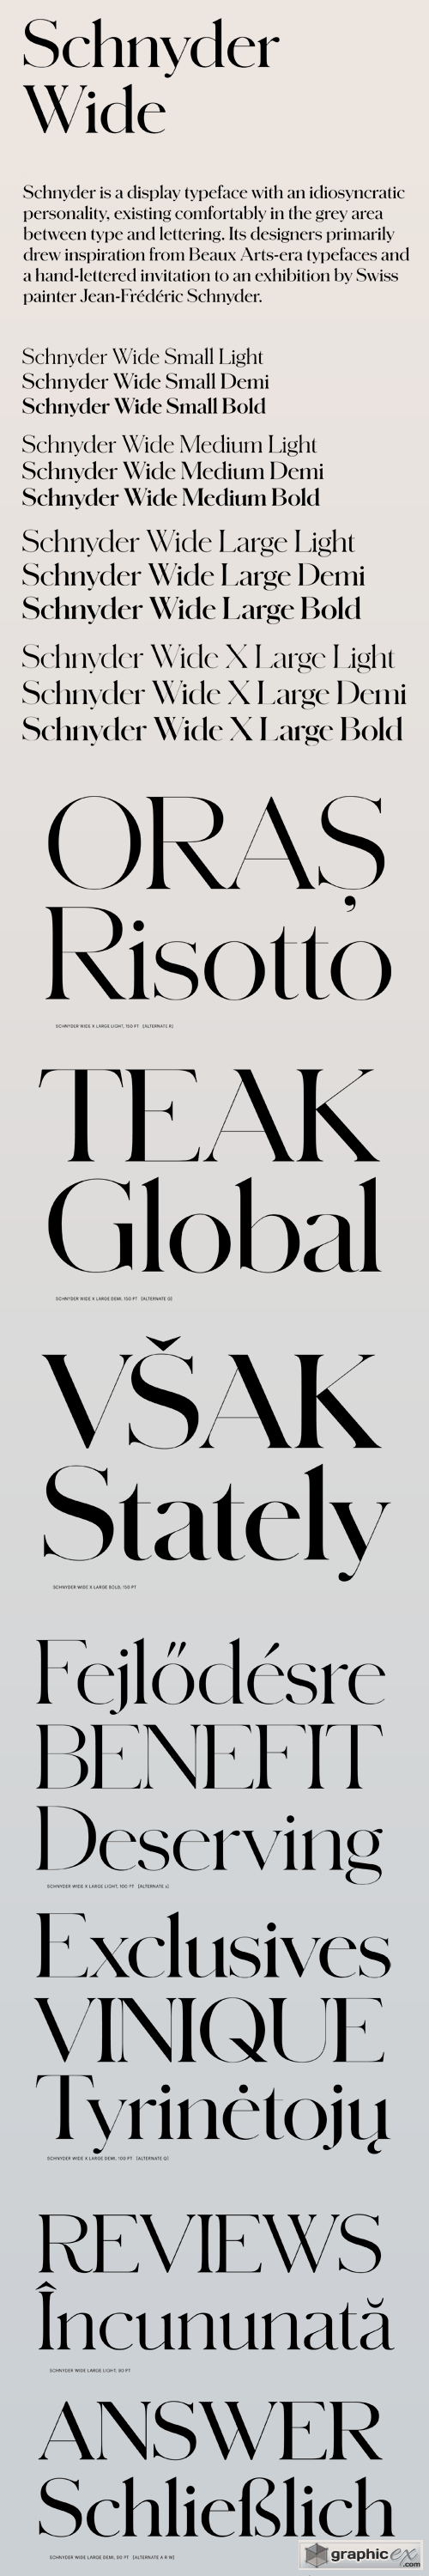 Schnyder Wide Font Family